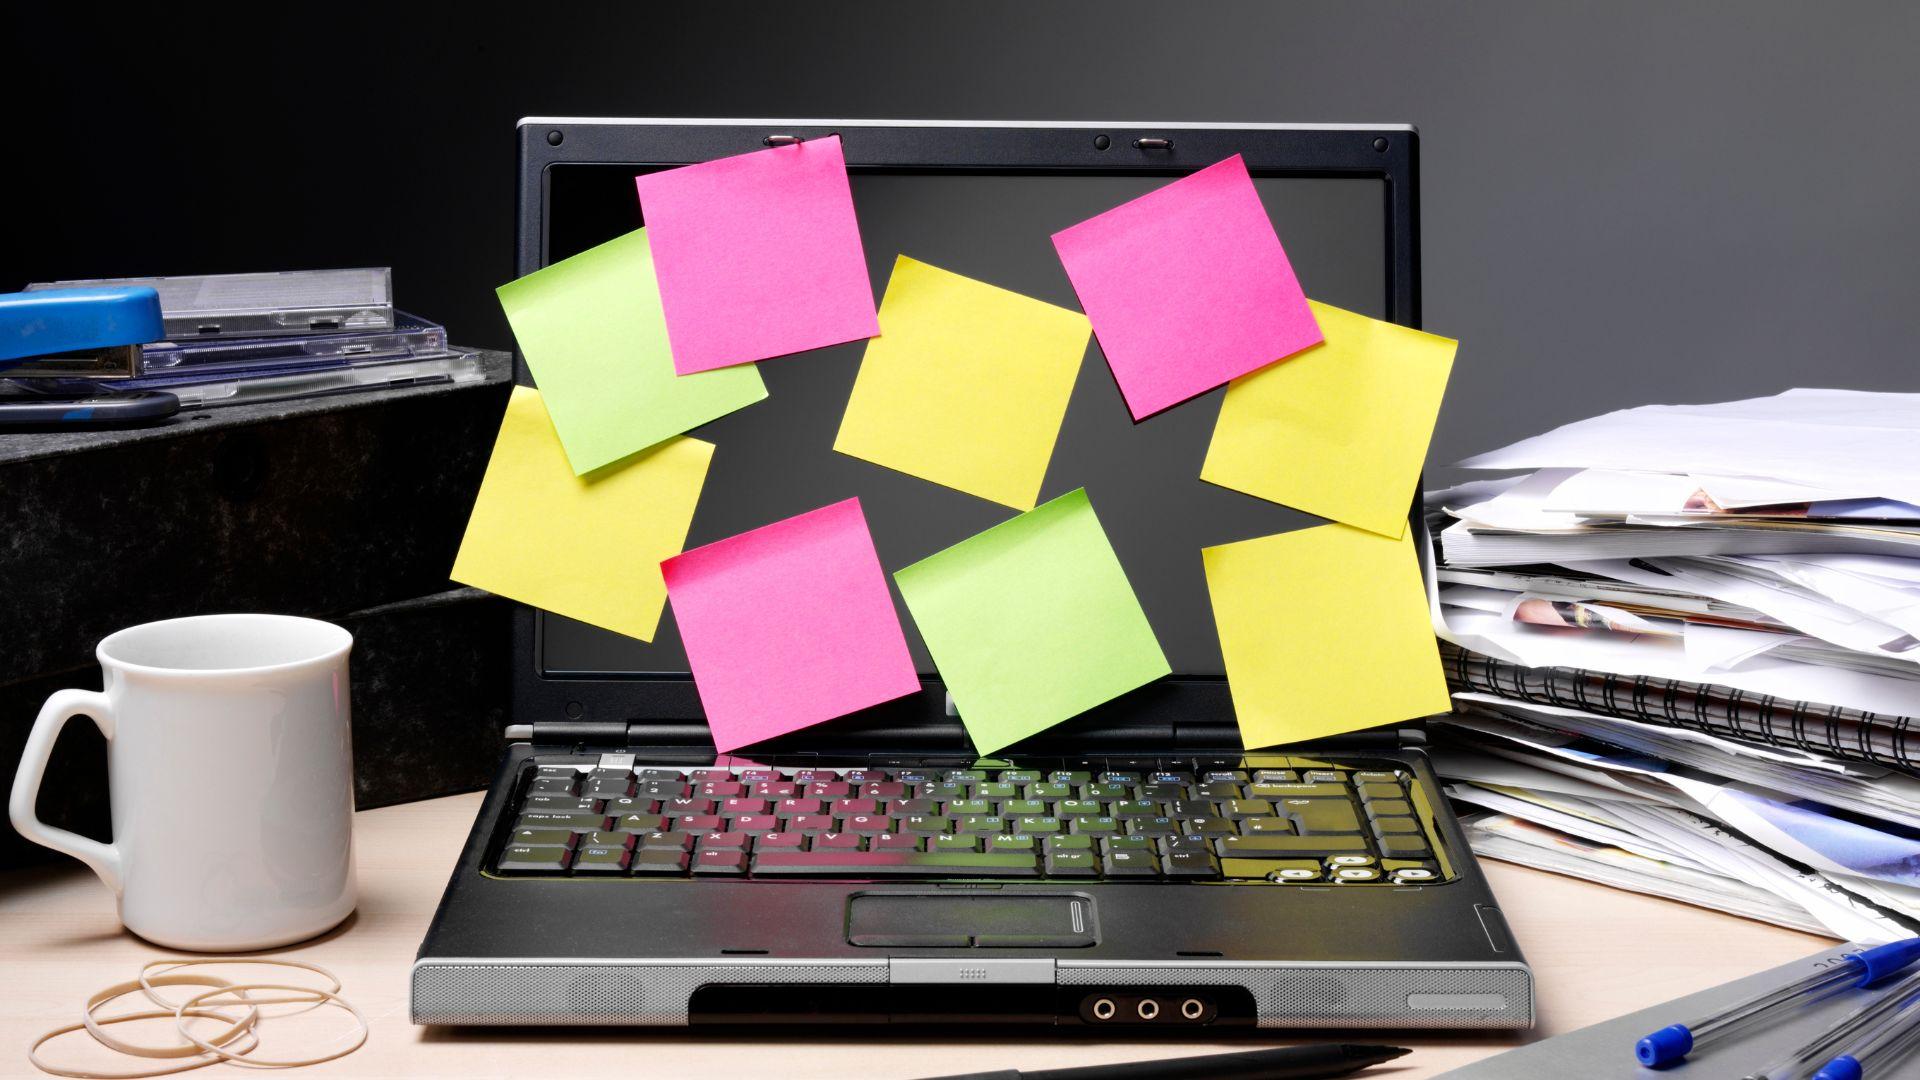 post it notes on a laptop to brainstorm blog topics for a niche